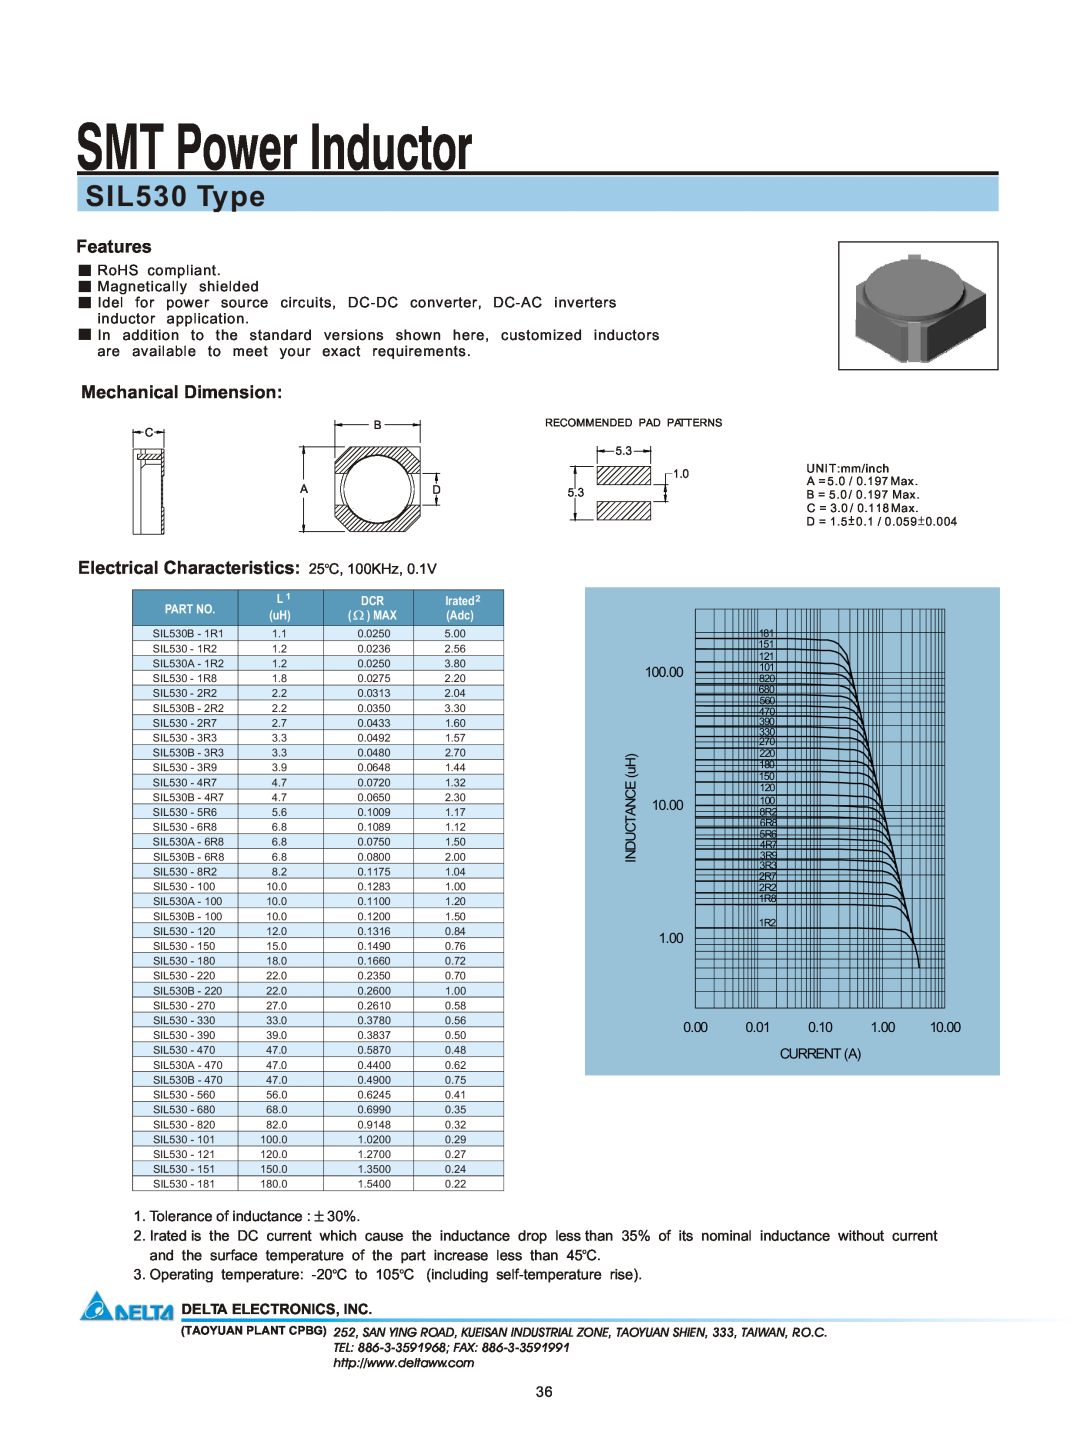 Delta Electronics manual SMT Power Inductor, SIL530 Type, Features, Mechanical Dimension, Tolerance of inductance, 1.00 